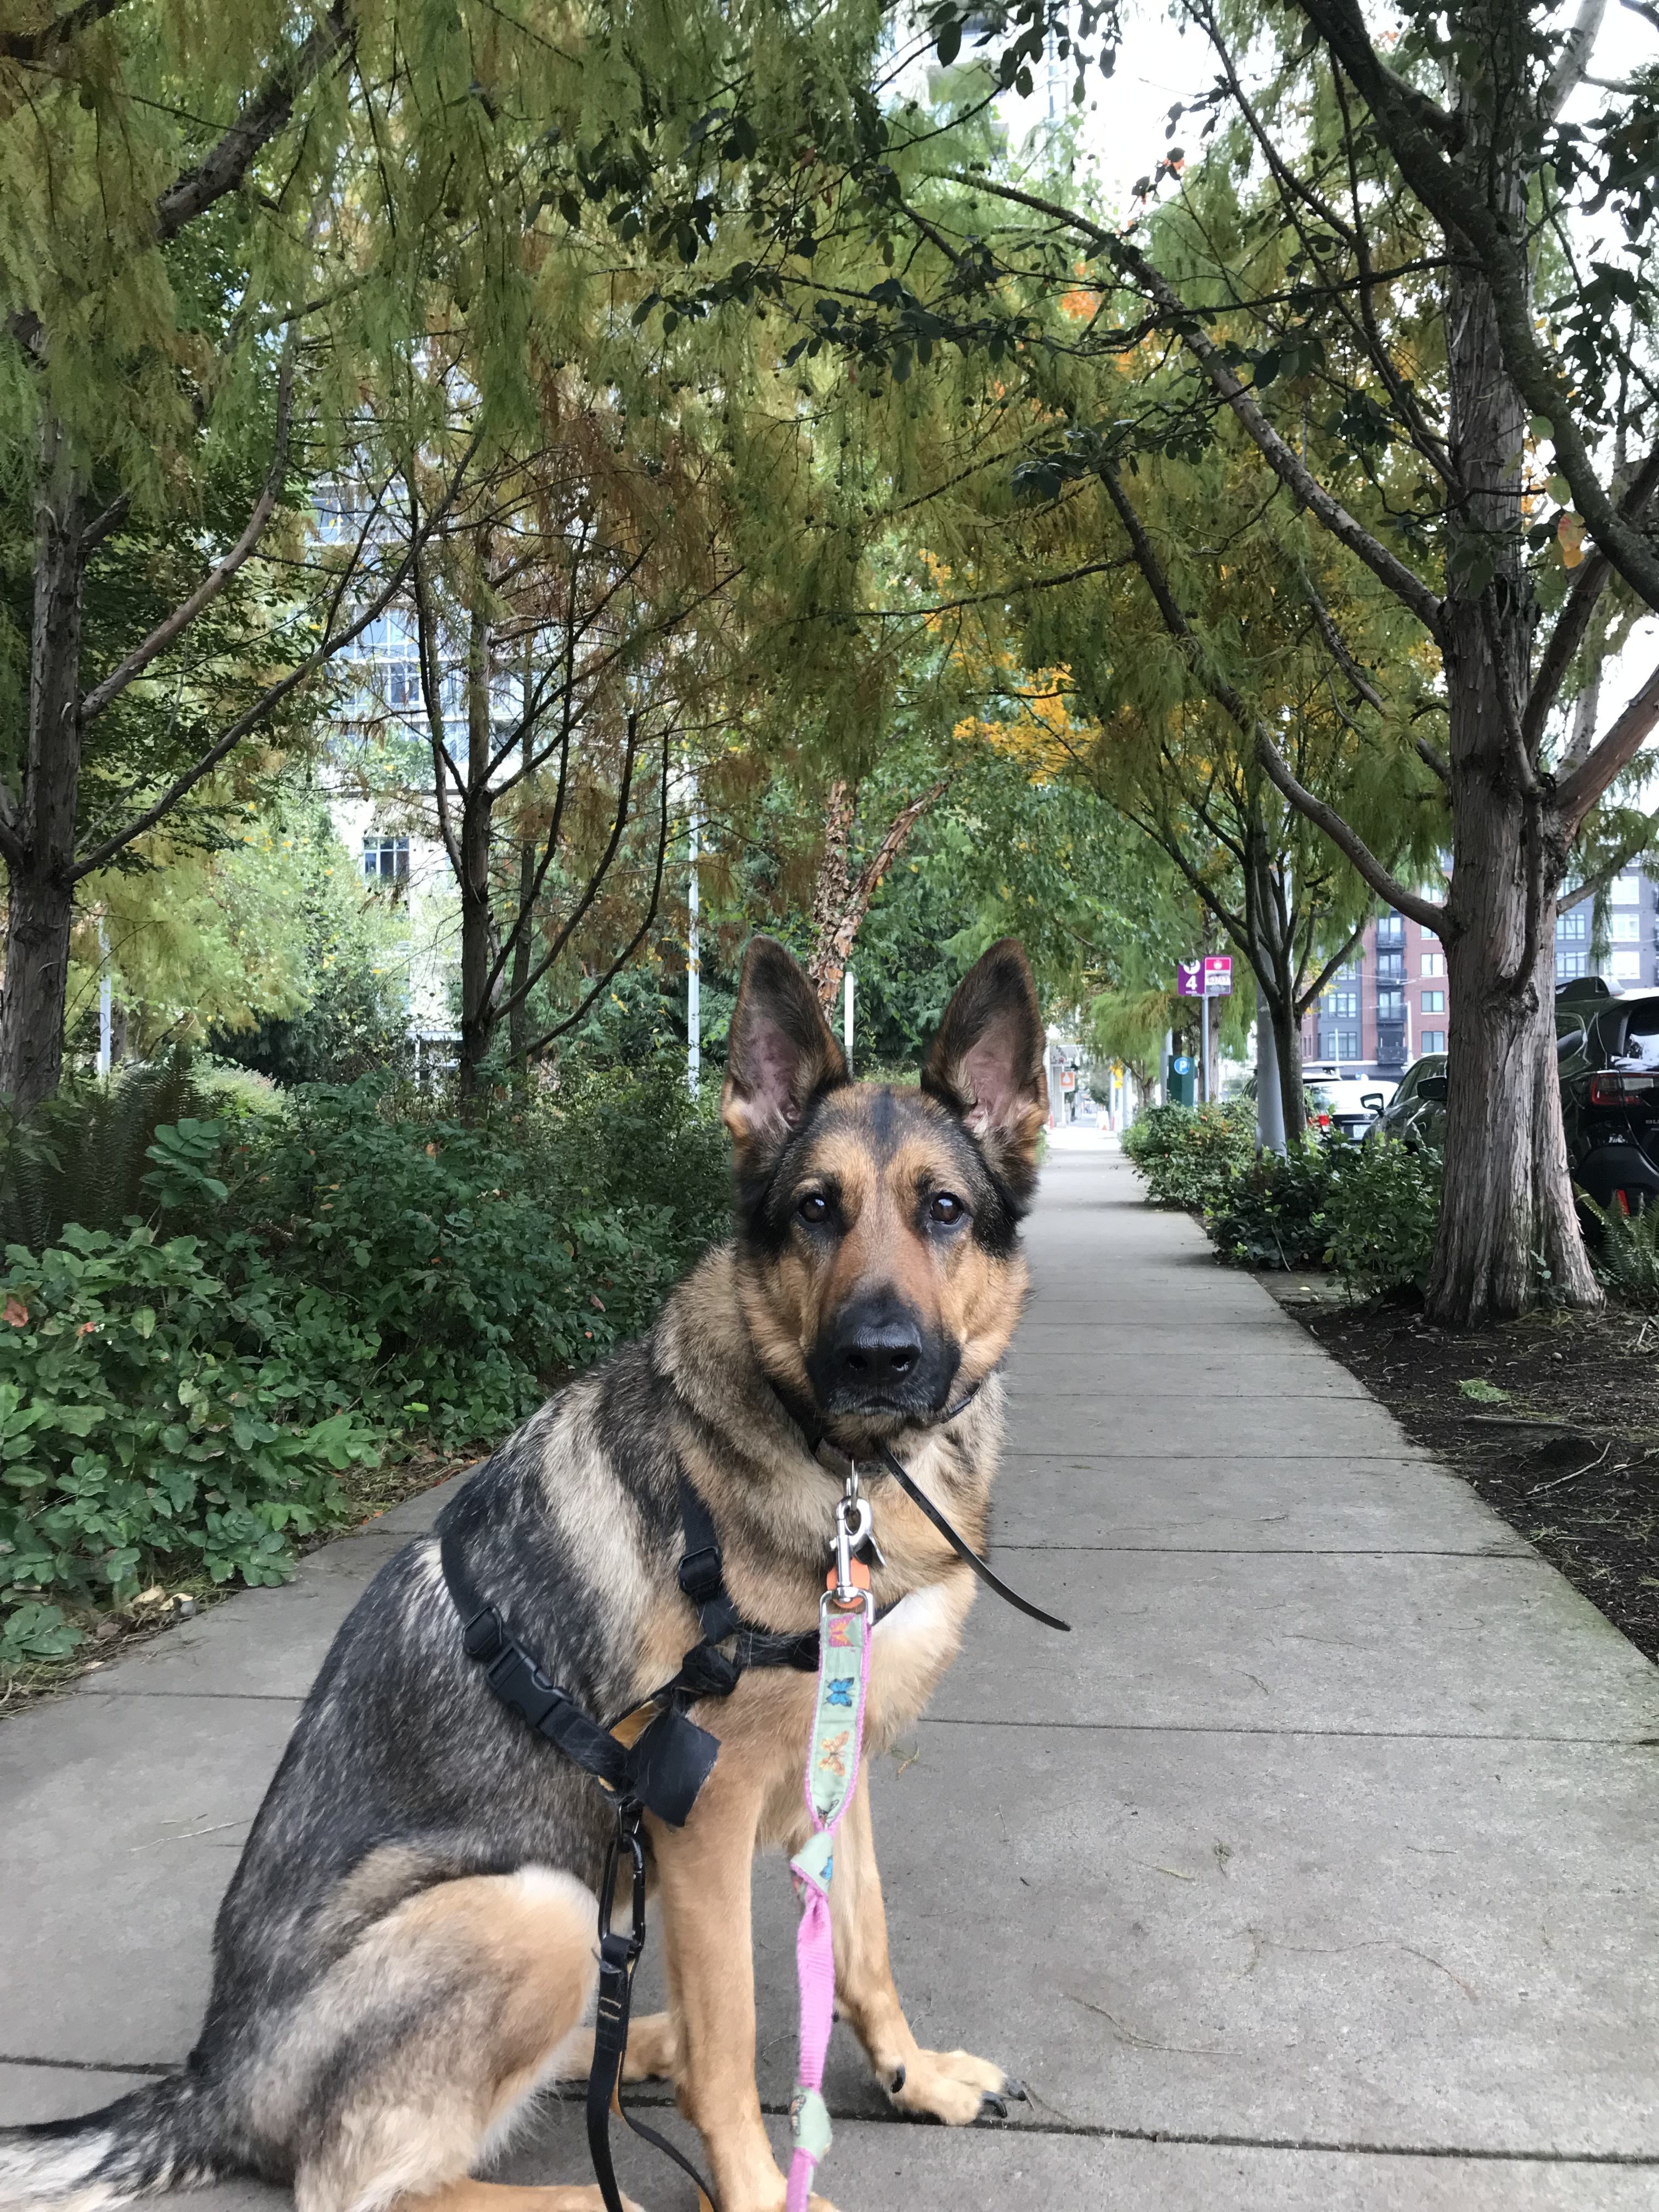 German shepard sitting on sidewalk looking directly into camera with trees in the background